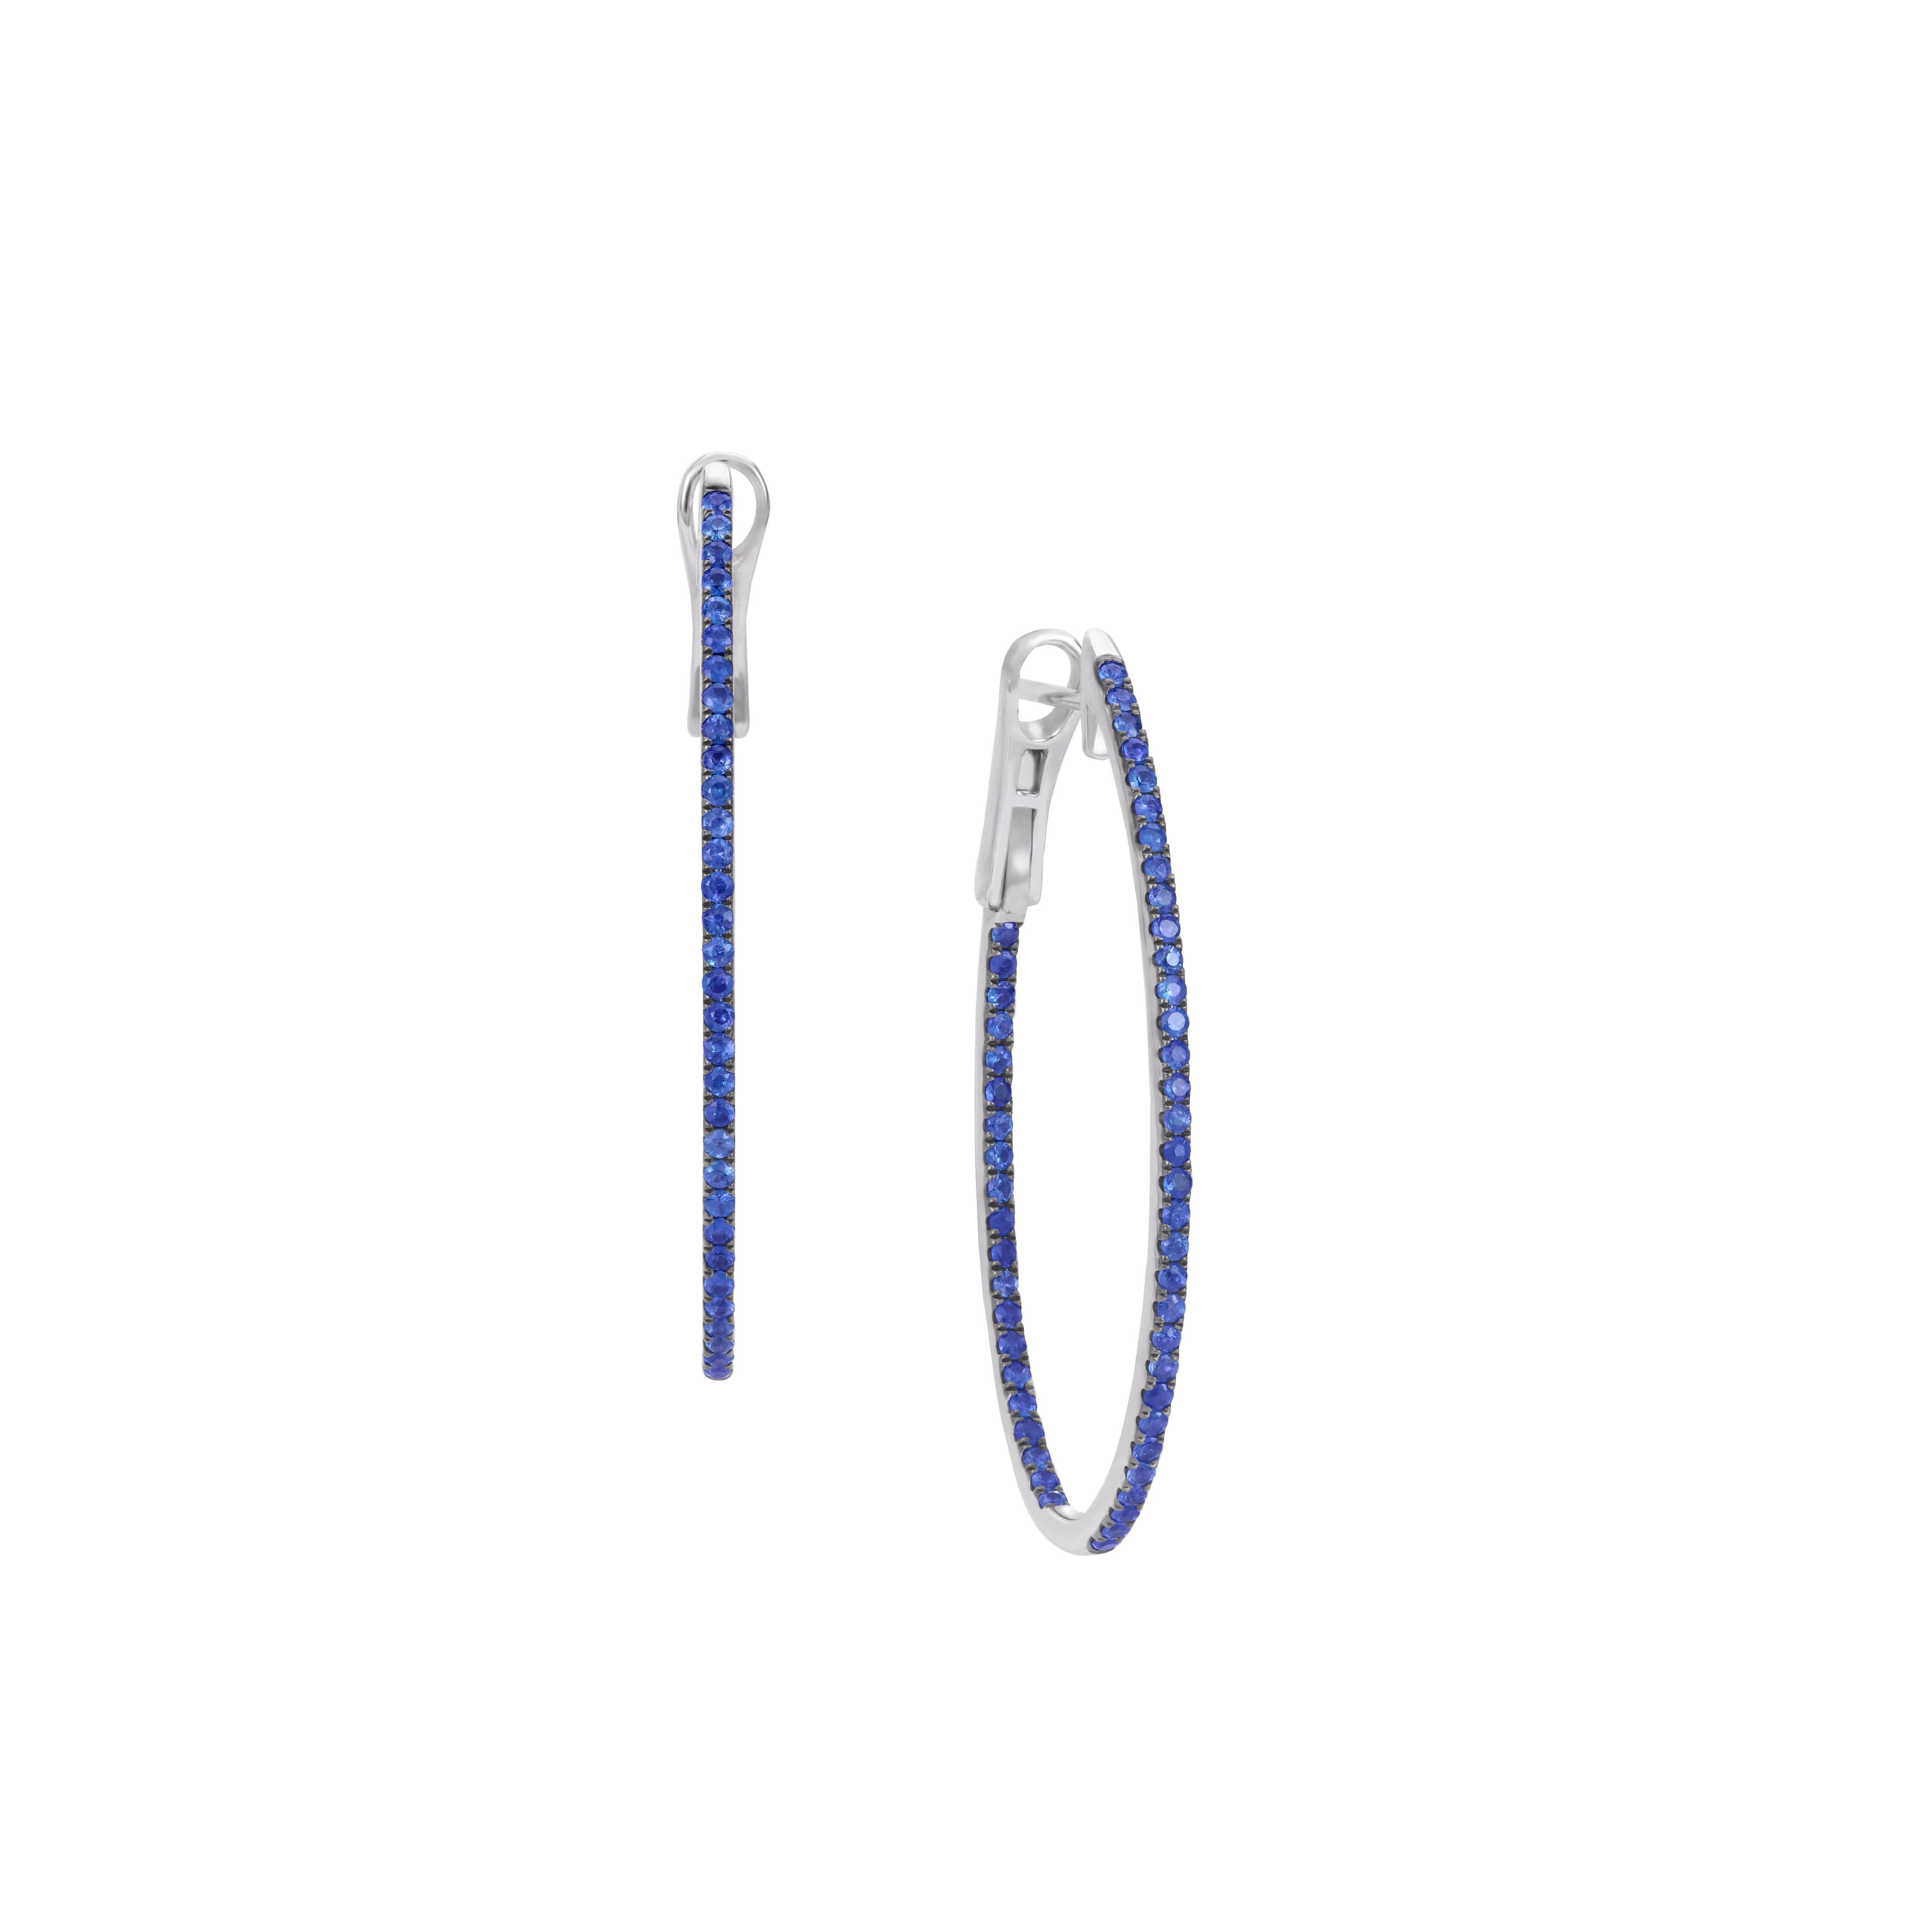 The unique pair of sapphire hoop earrings are made of 18K white gold. On the gold body of the earrings, there are exotic round cut African blue sapphires encrusted in a micro pave setting. In these gold hoop earrings, the total weight of the